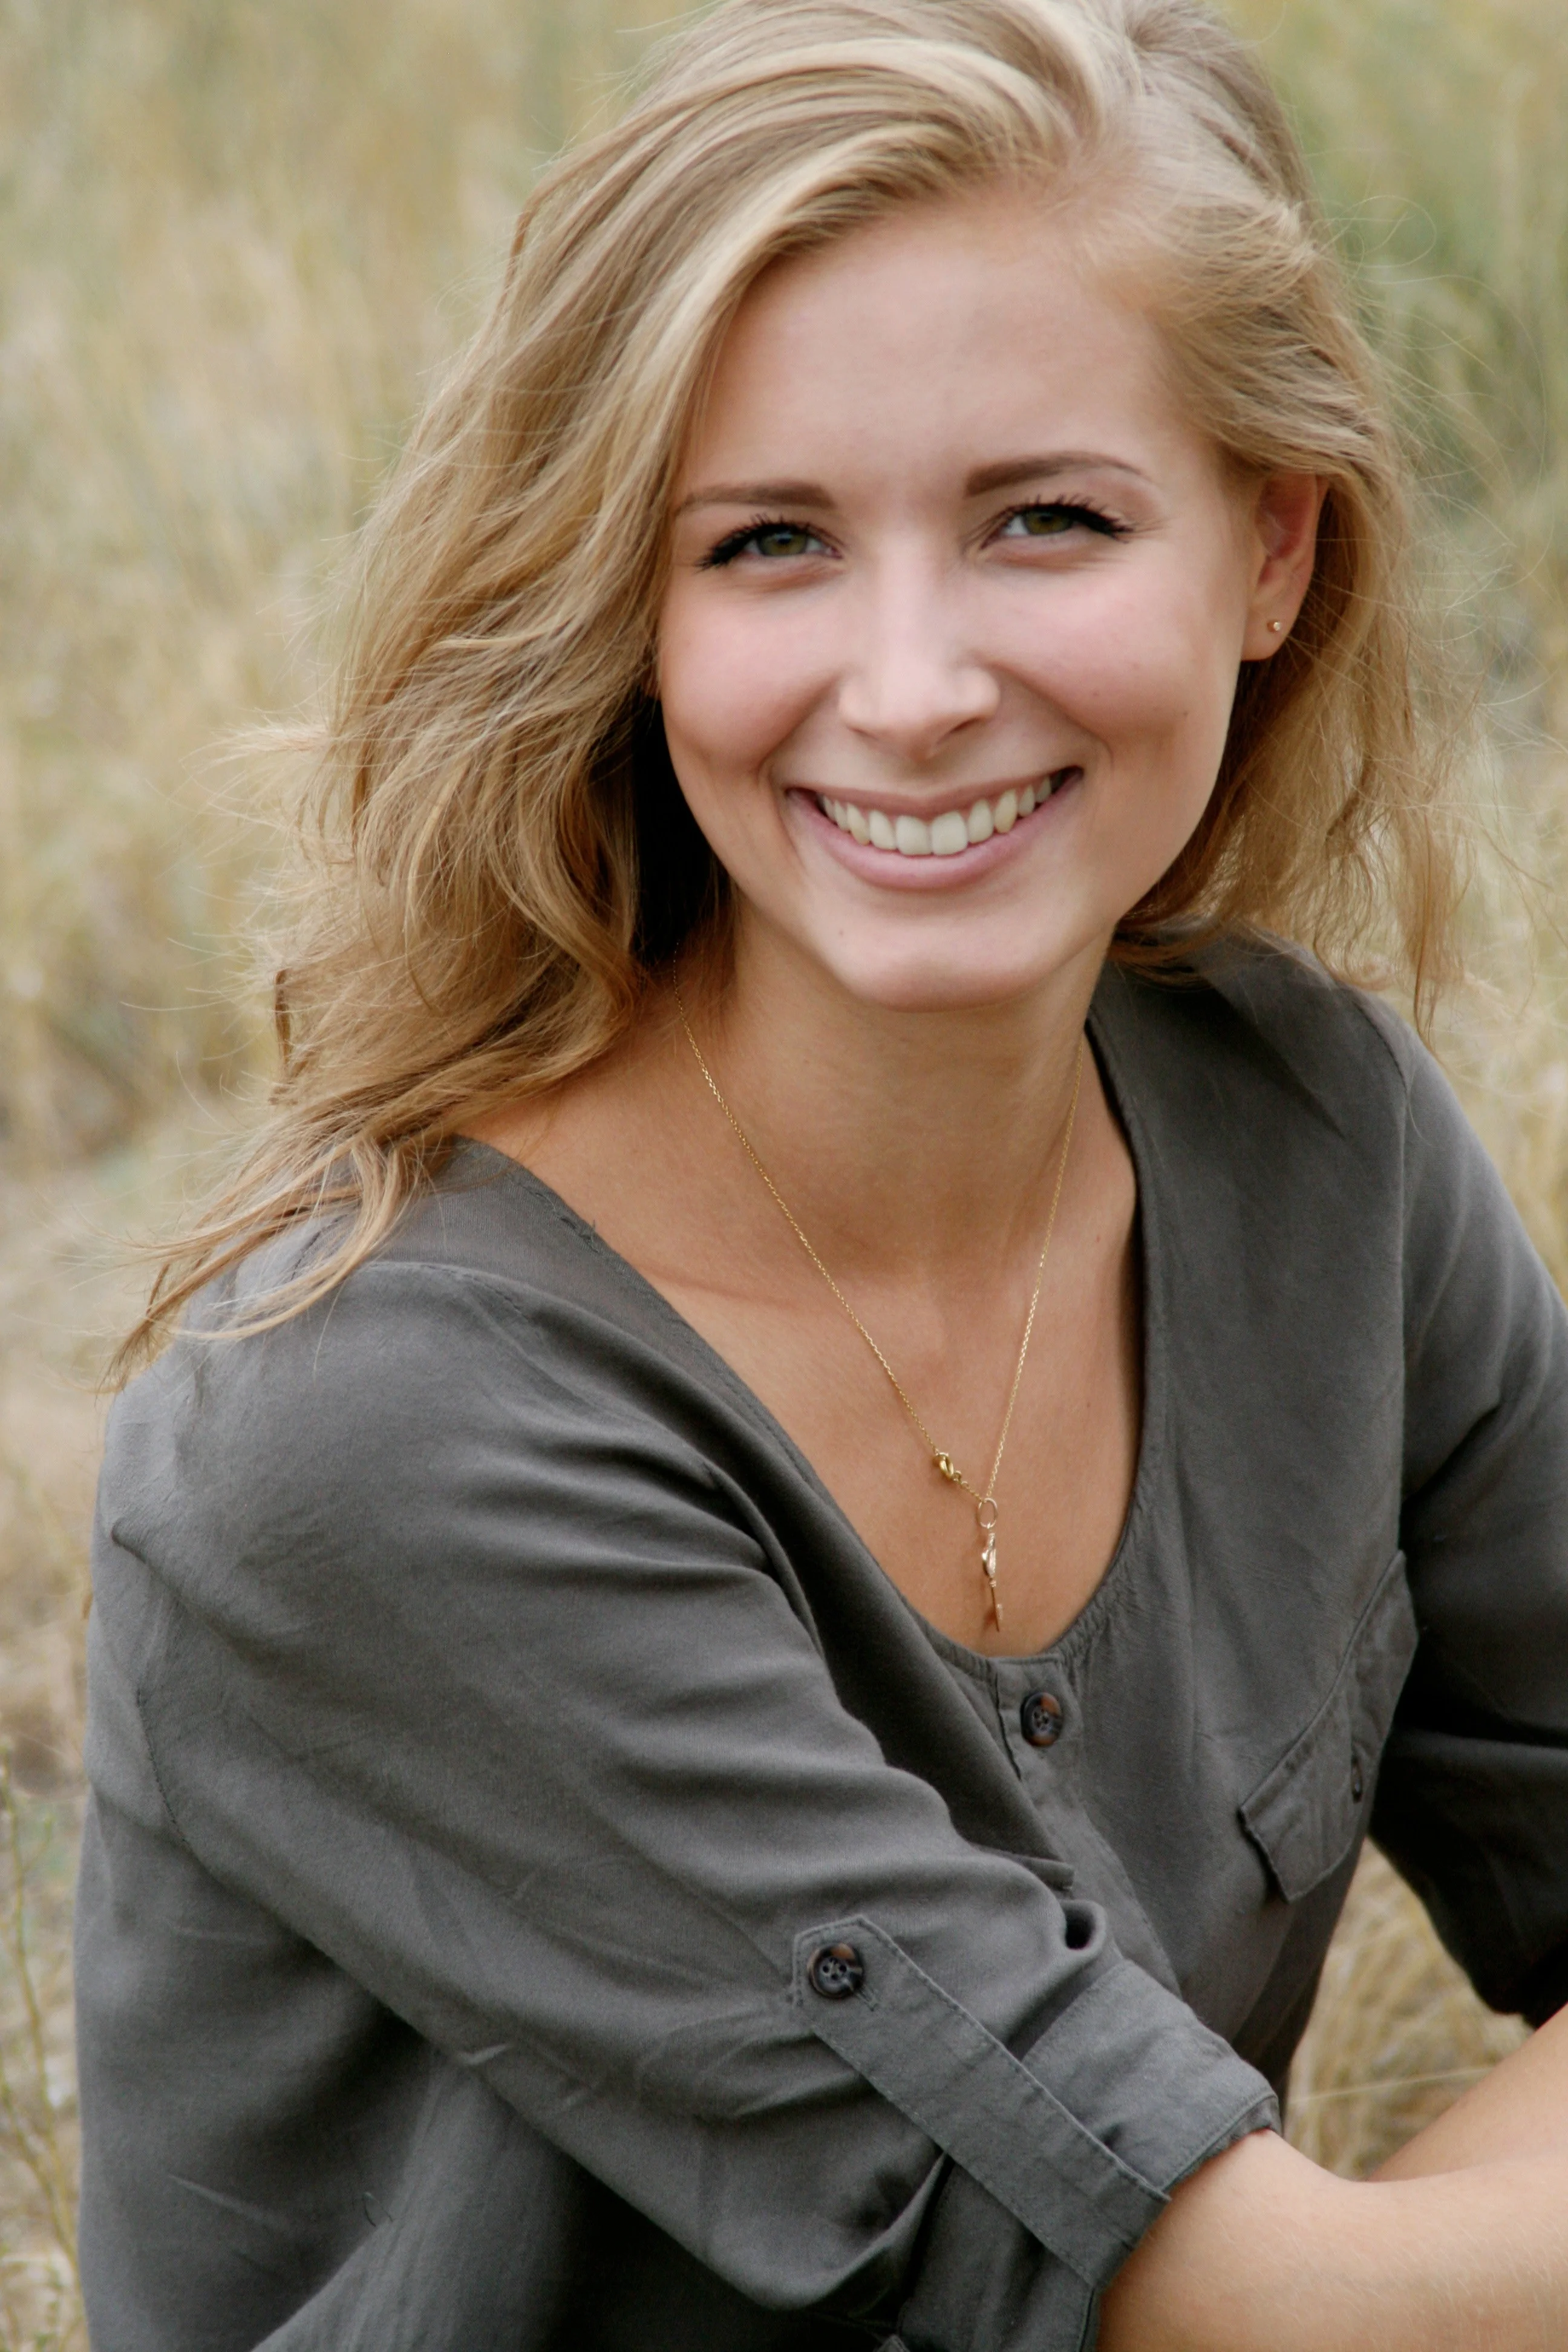 a photograph of a smiling blonde hair woman